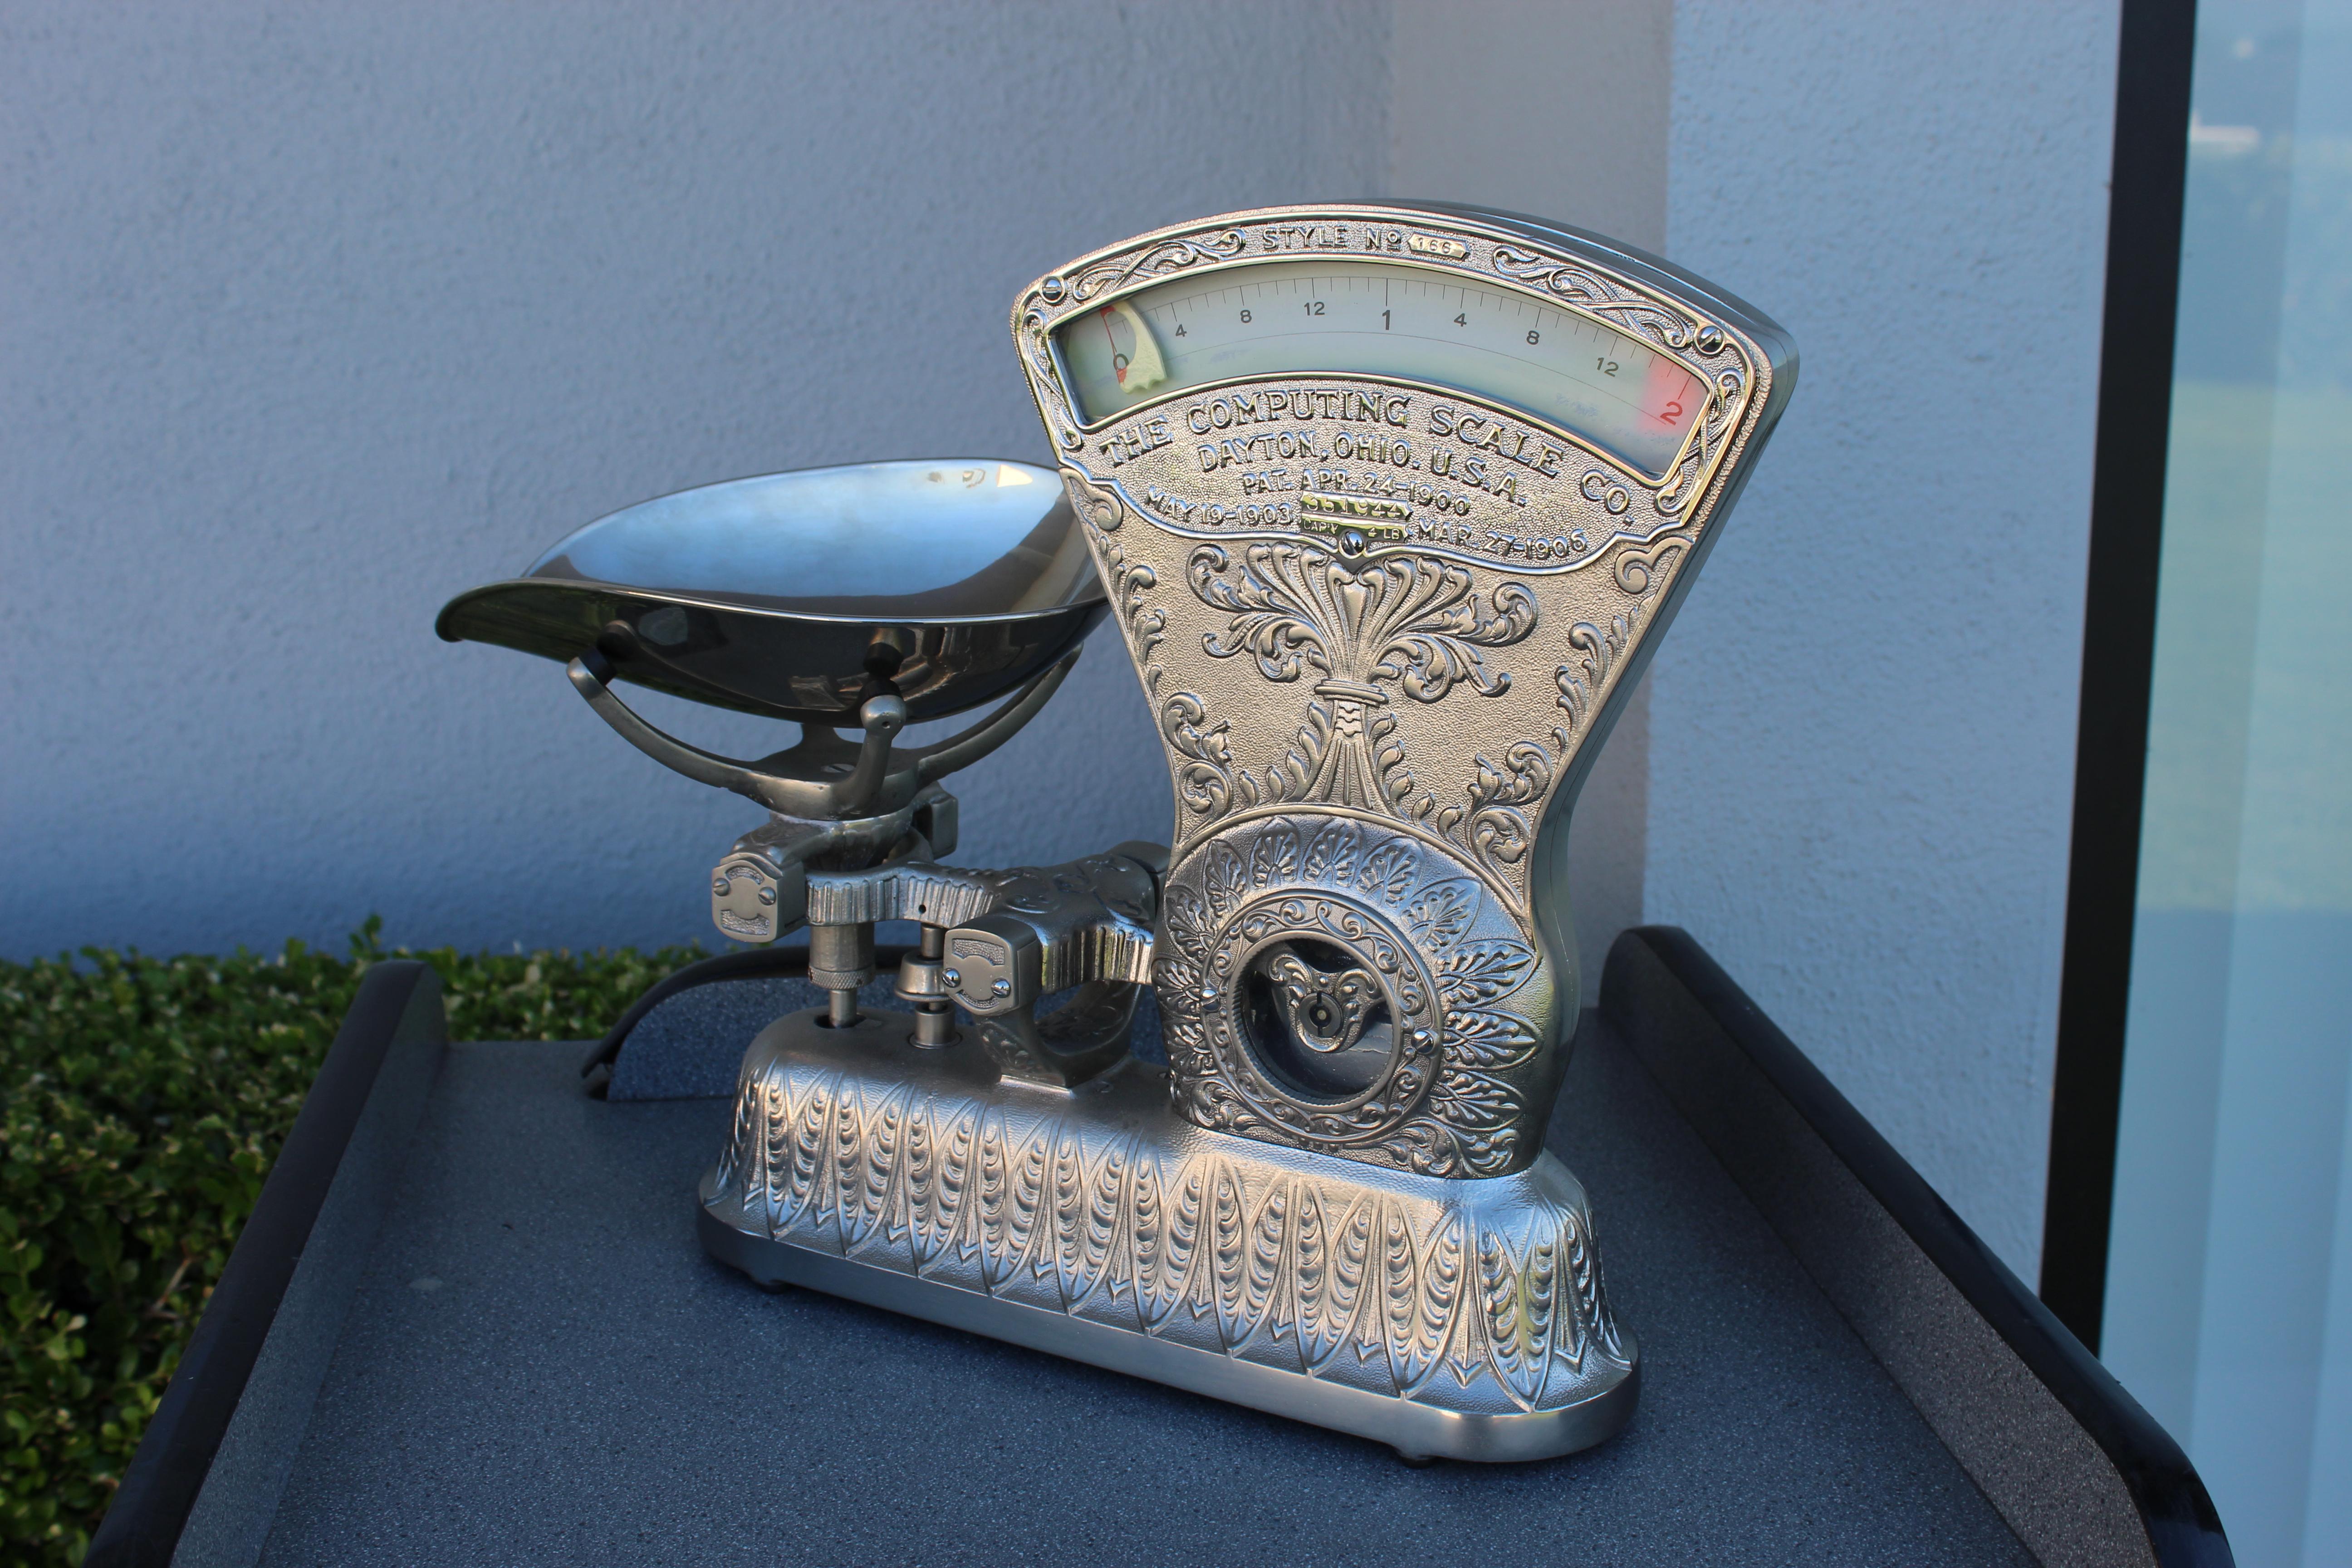 1900s Original the Computing Scale Restored Vintage Scale No.166 For Sale 1